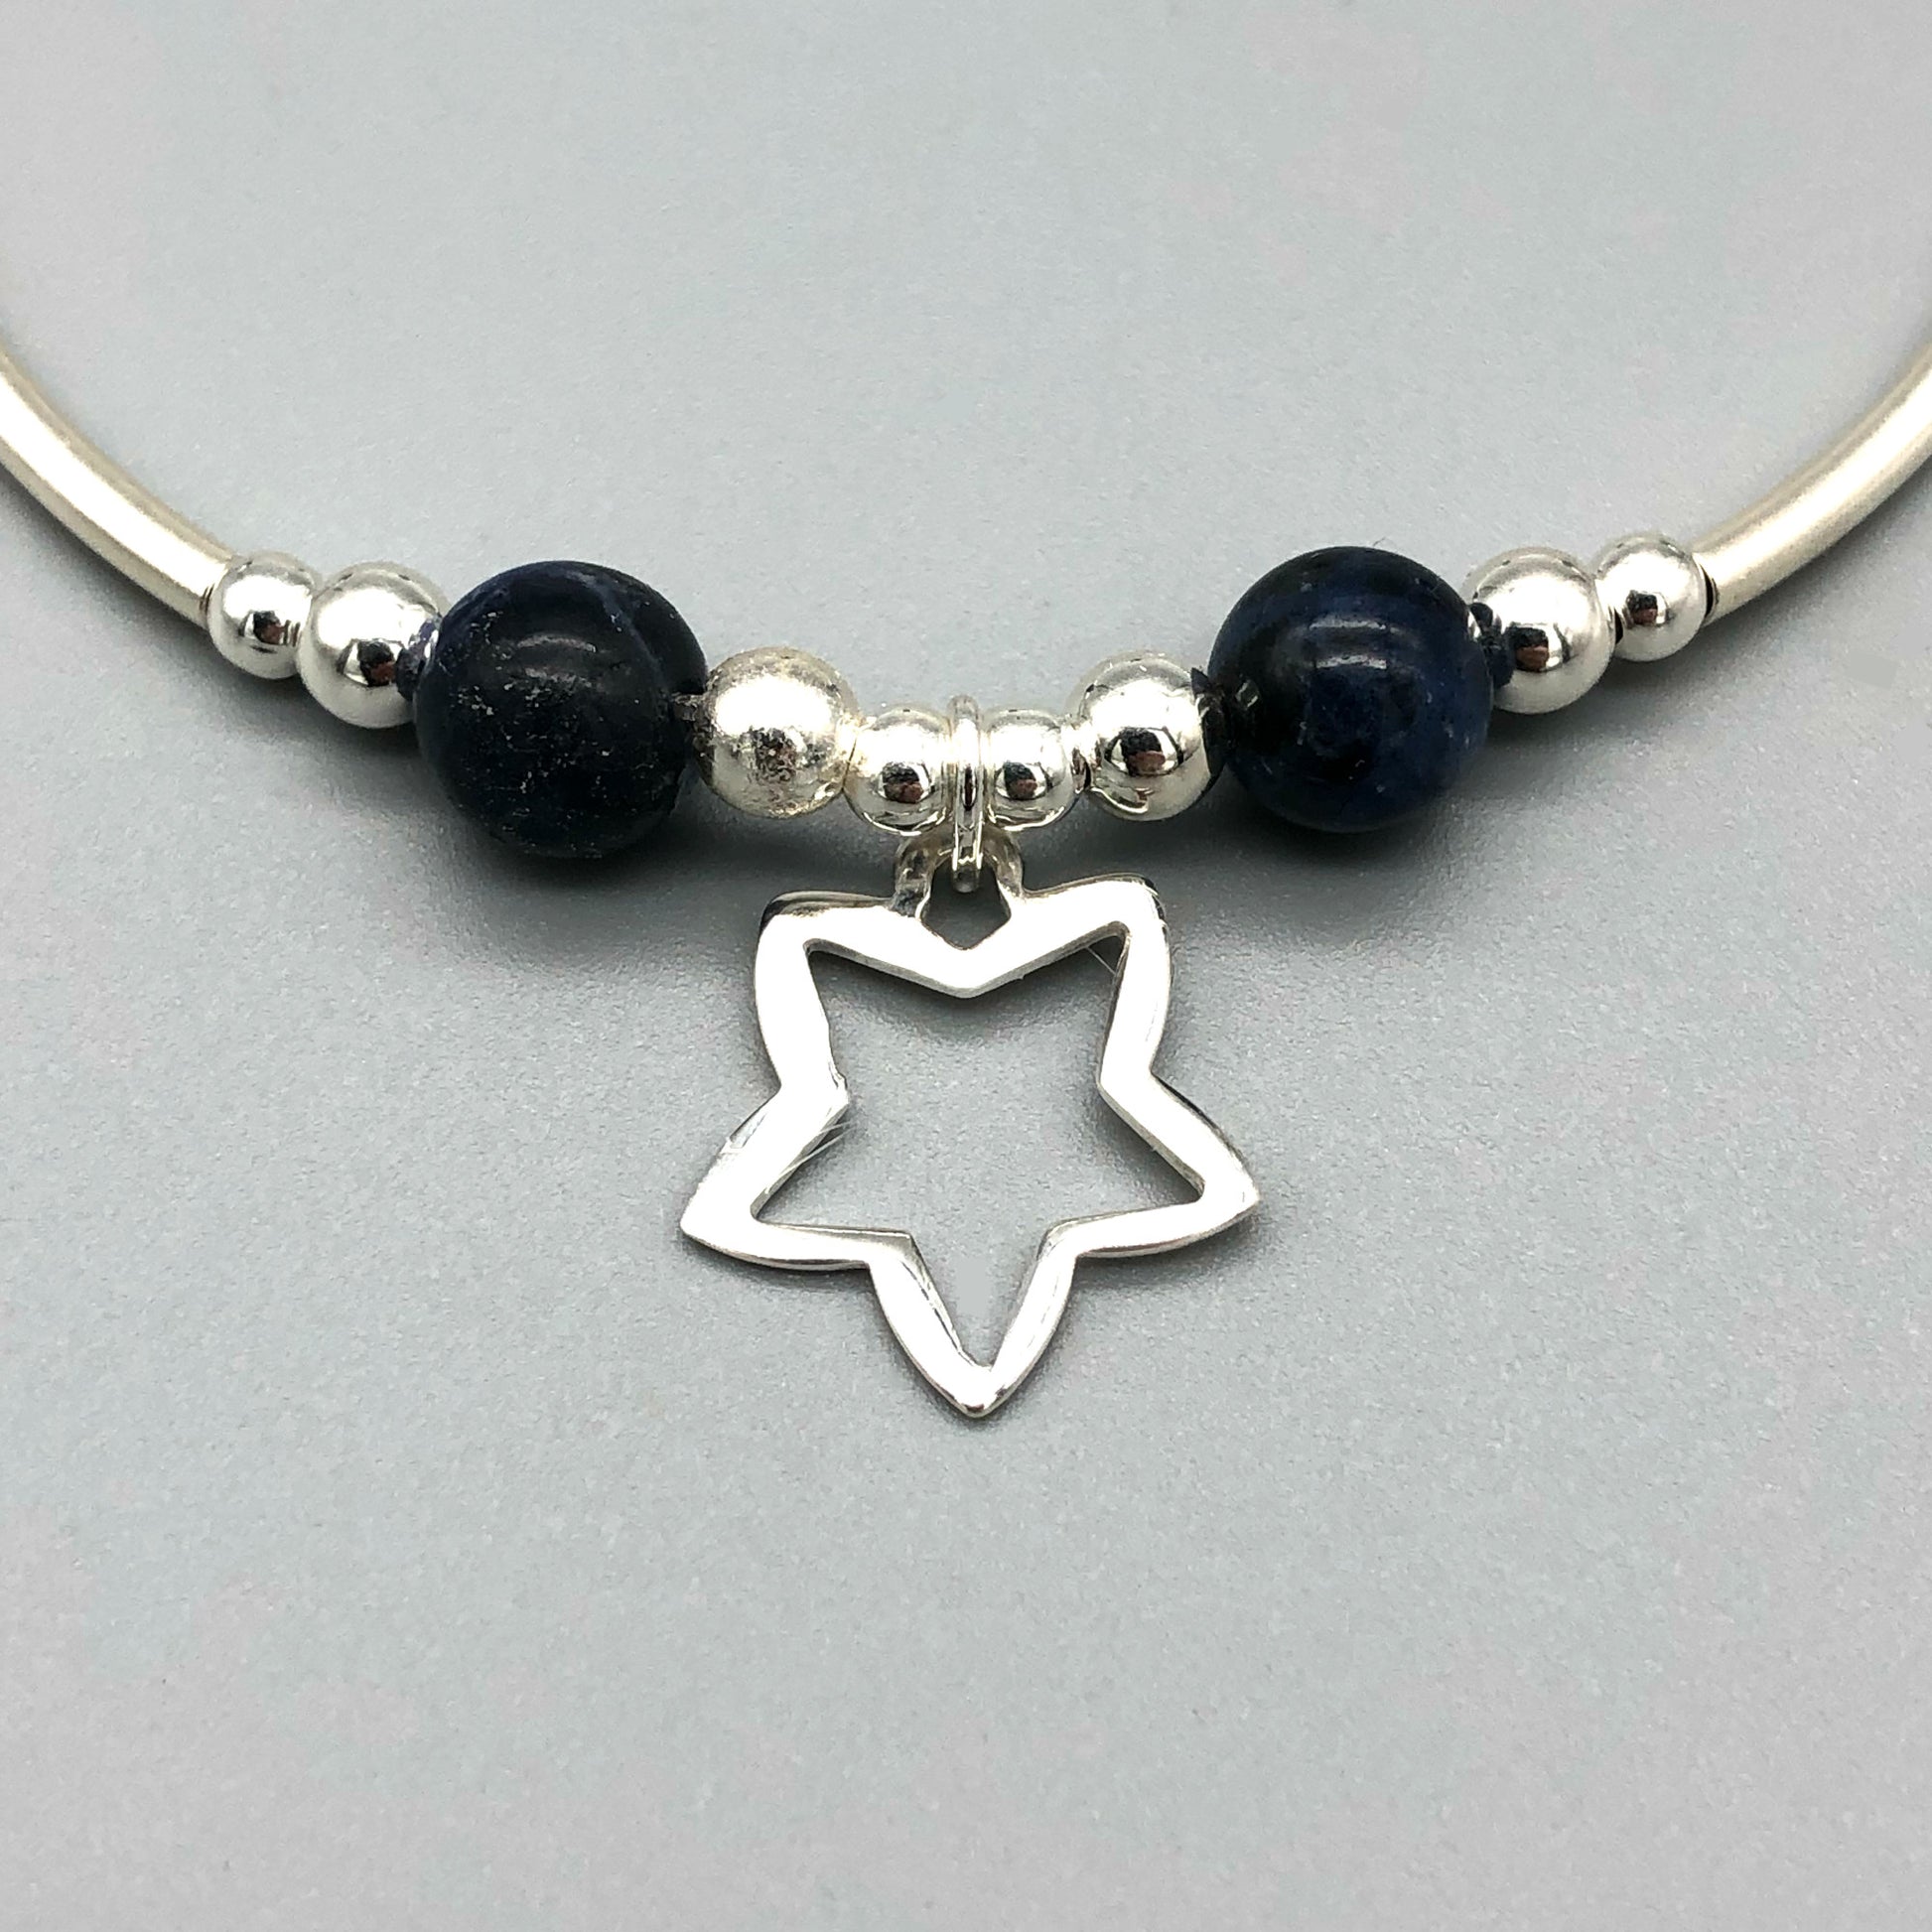 Closeup of Star charm sodalite healing stone &  sterling silver beads women's stacking bracelet by My Silver Wish